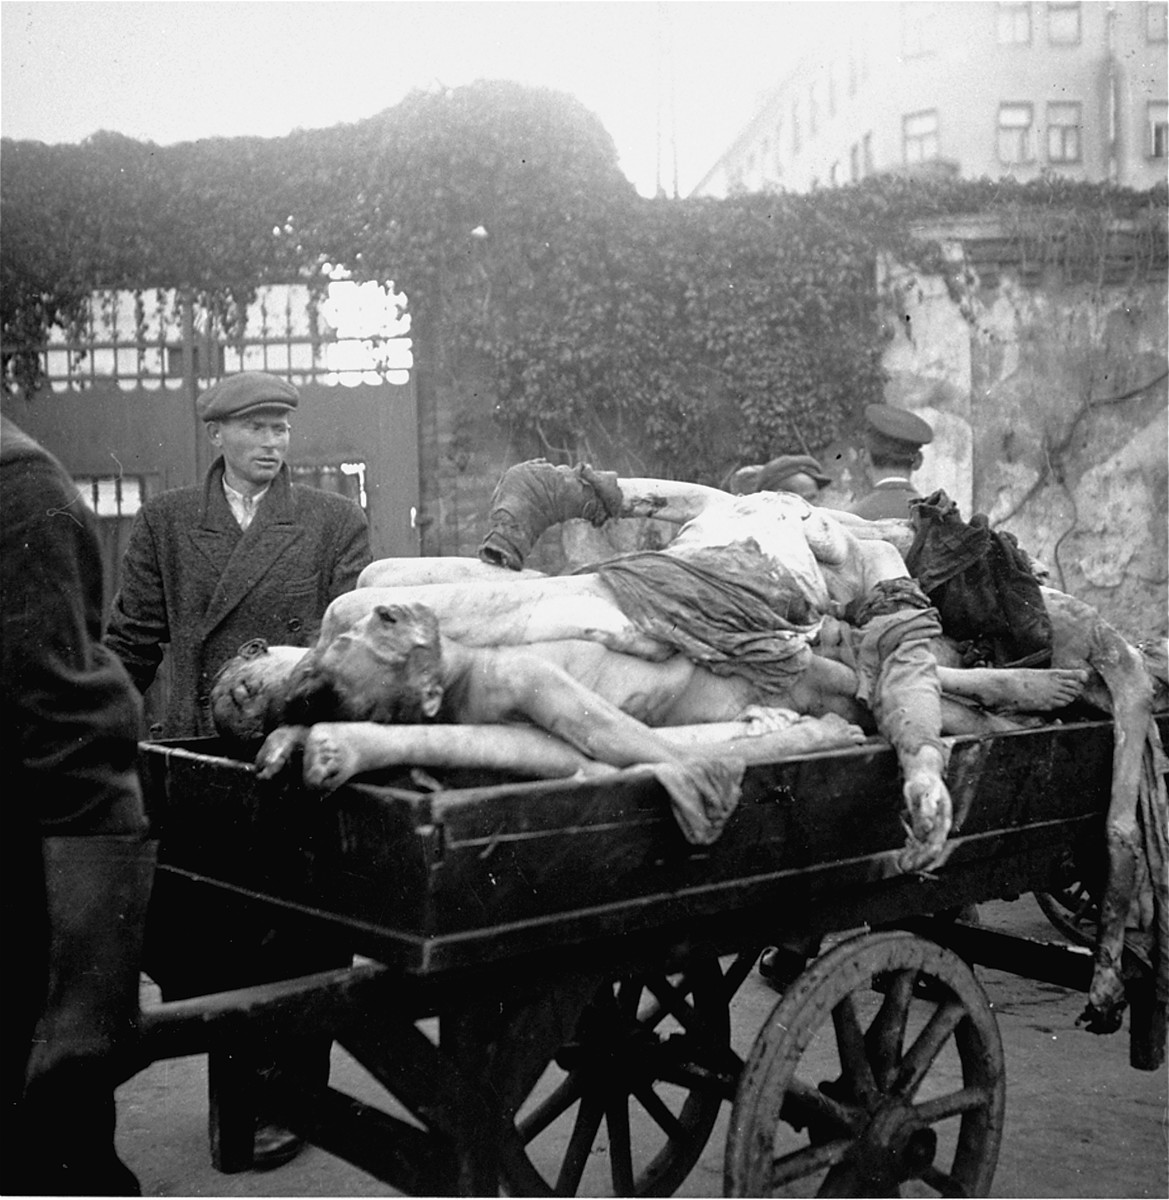 An undertaker pulls a cart laden with corpses into the Jewish cemetery on Okopowa Street for burial in a mass grave.  

Joest's caption reads: "The arms of the dead hanging over the side of the body cart moved by themselves.  It was an eerie sight.  In the background is the entrance to the Jewish cemetery."